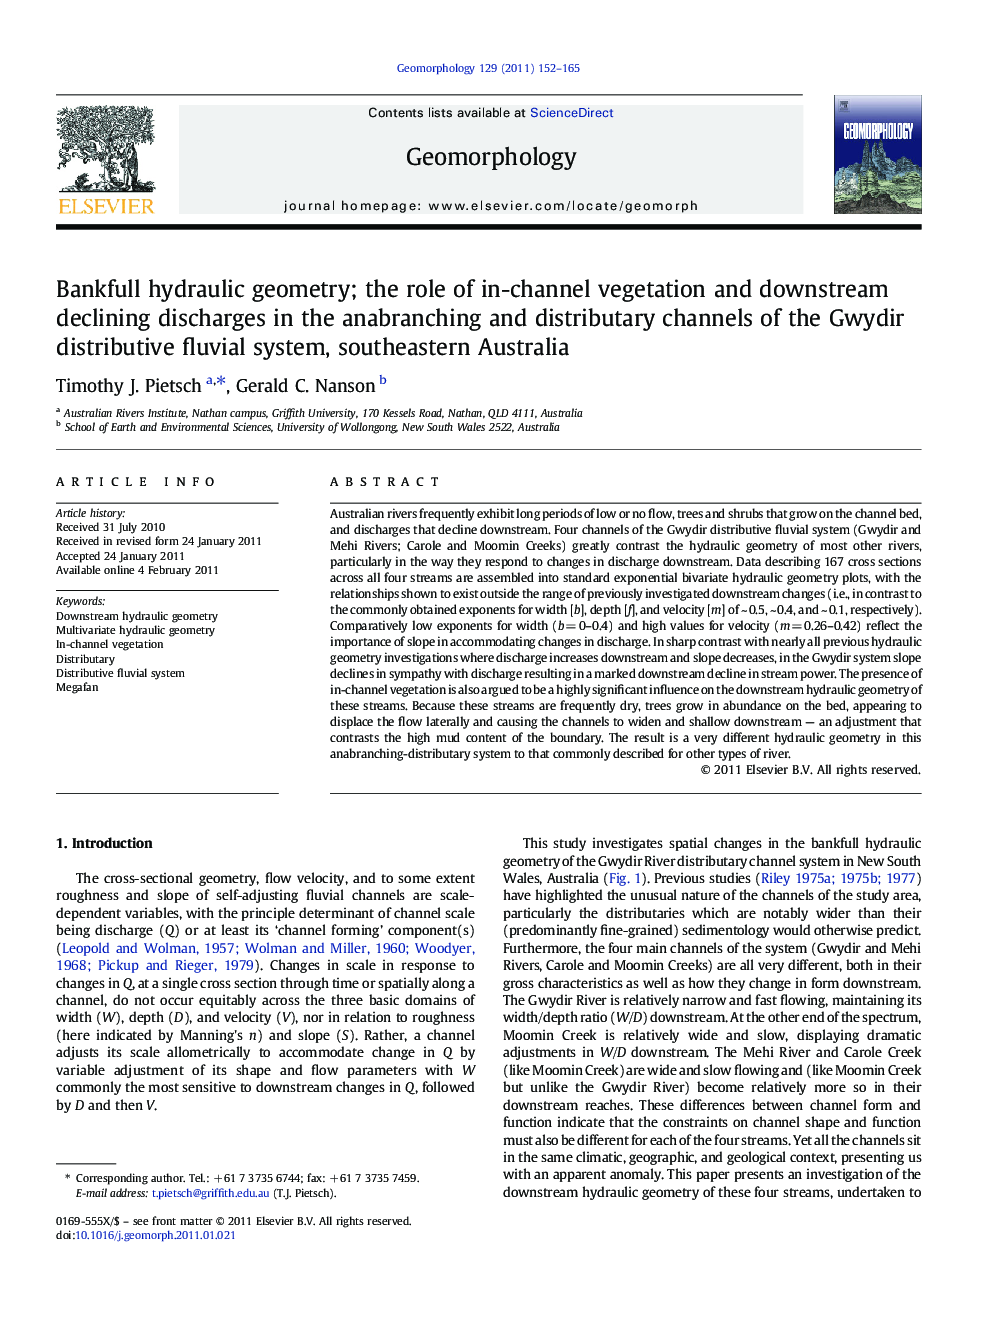 Bankfull hydraulic geometry; the role of in-channel vegetation and downstream declining discharges in the anabranching and distributary channels of the Gwydir distributive fluvial system, southeastern Australia